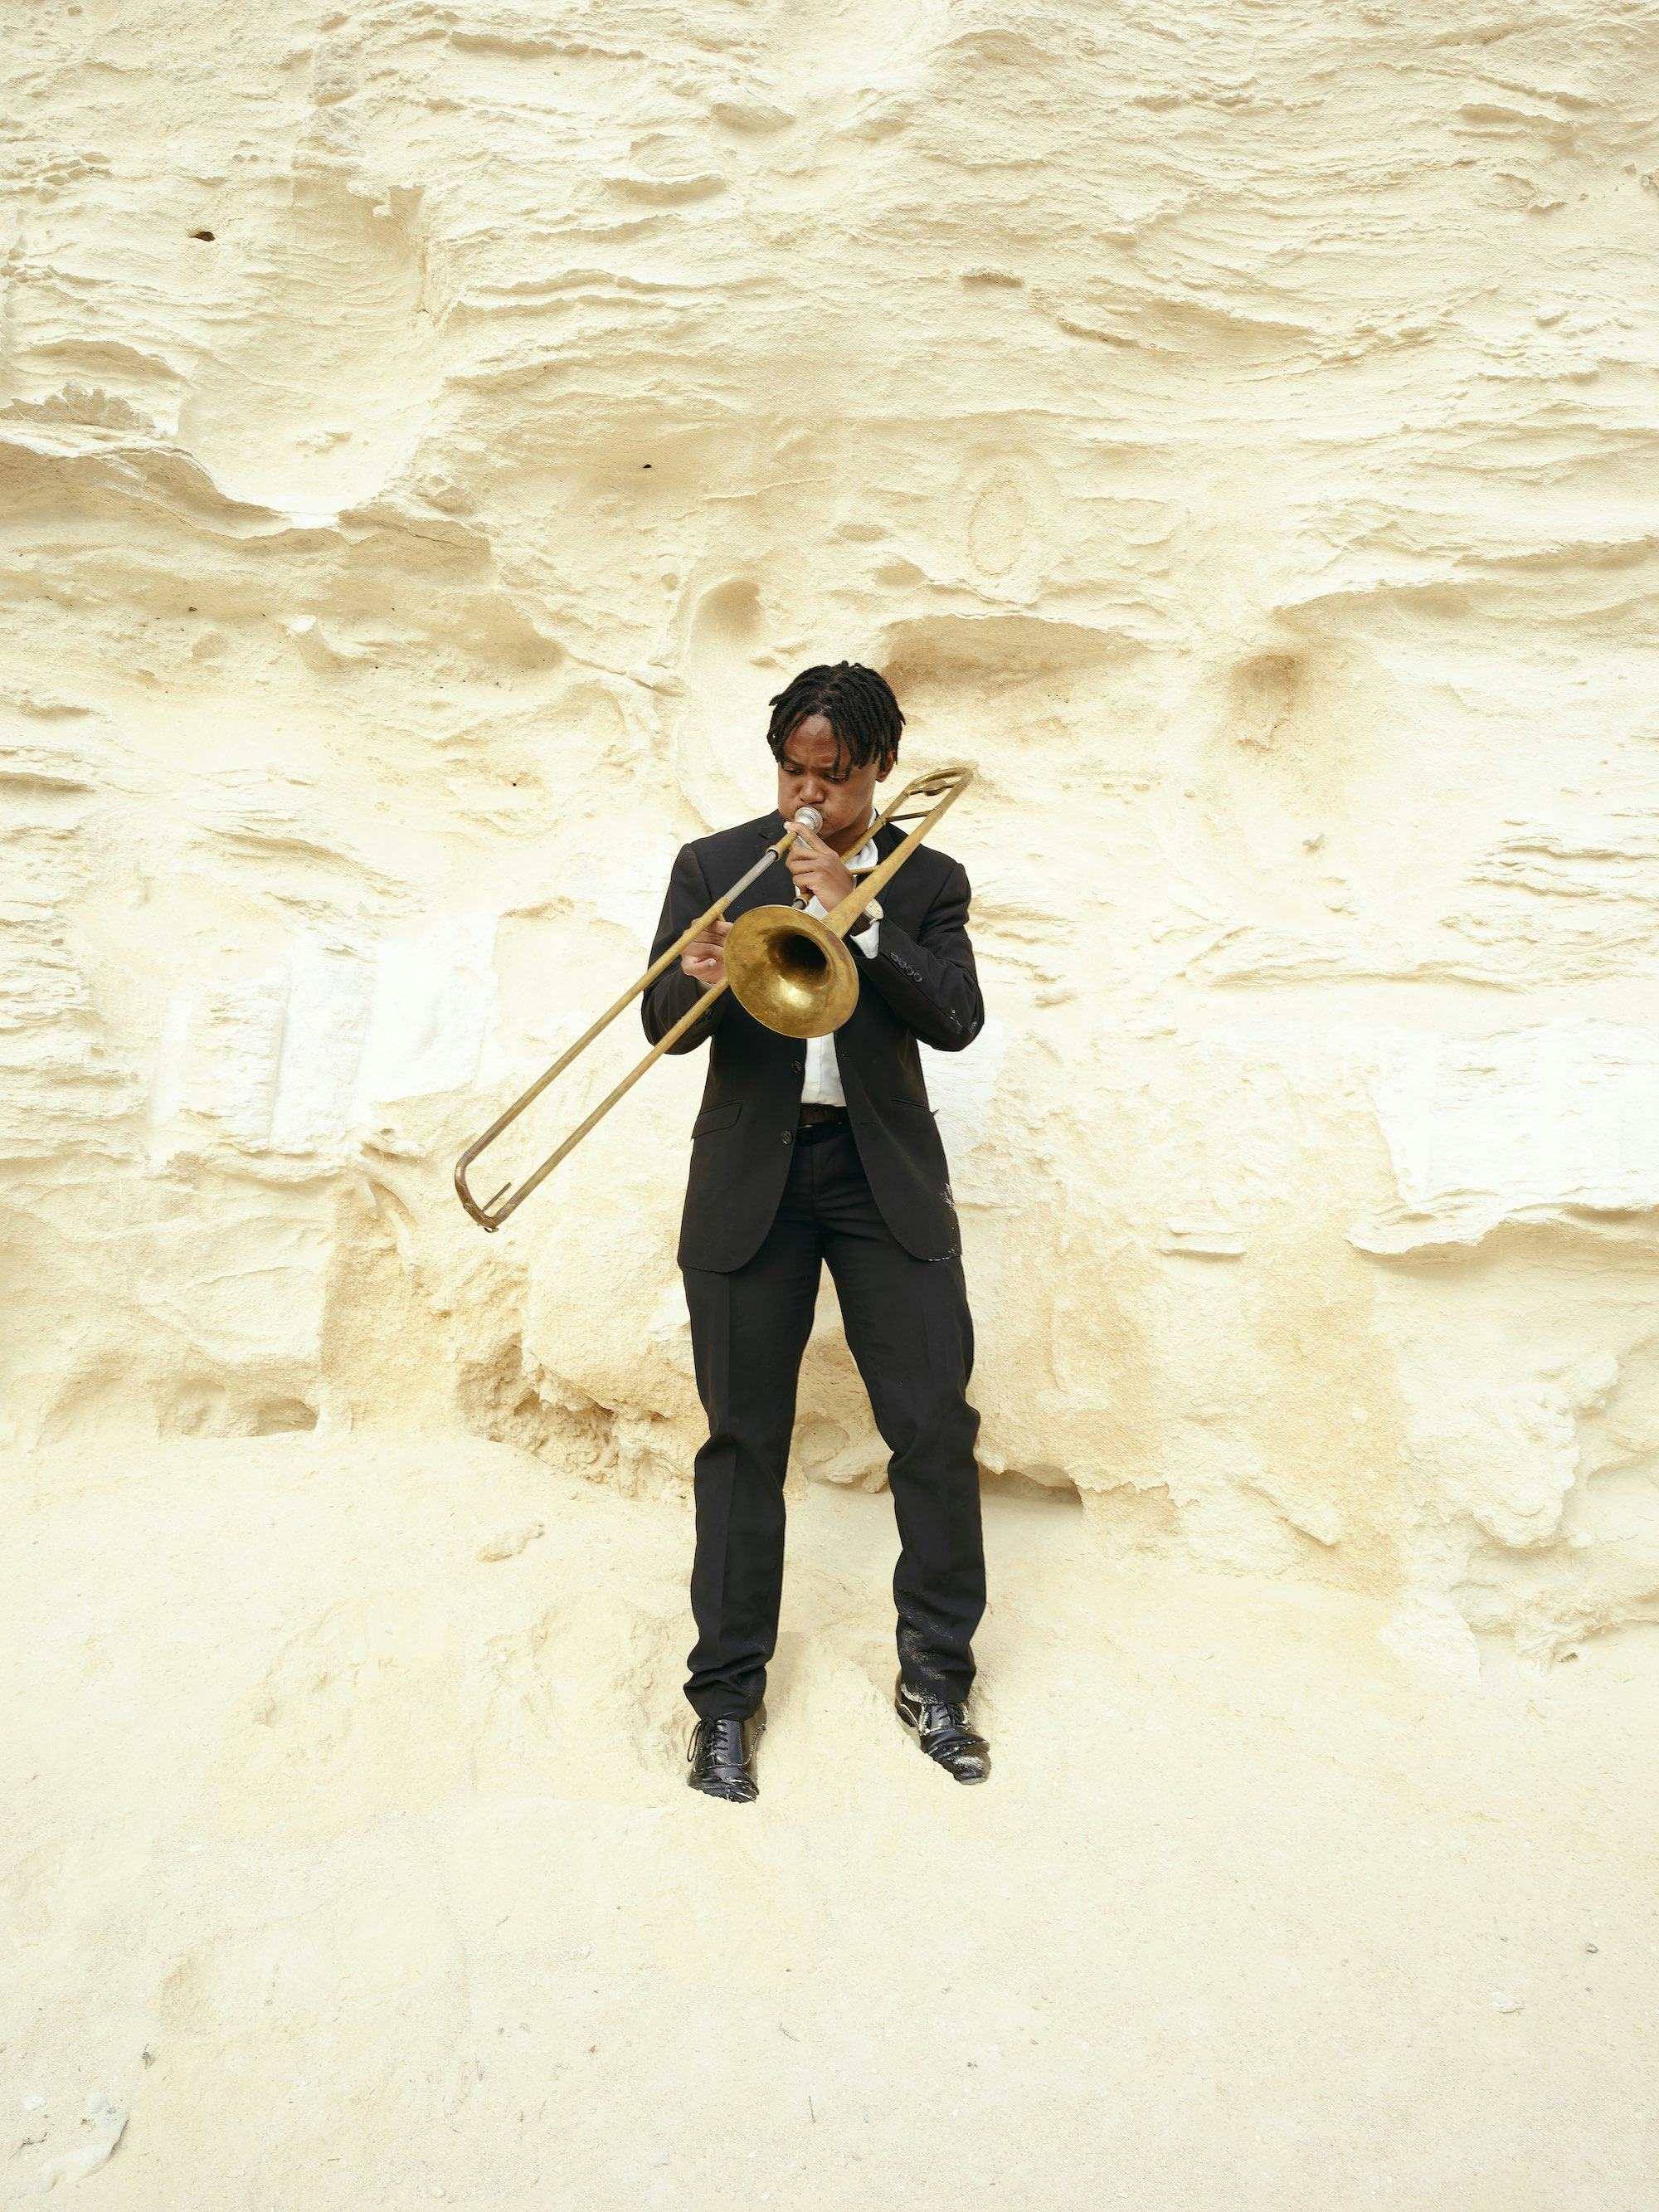 Self portrait of the artist in front of a mountain, playing the trombone © Thero Makepe